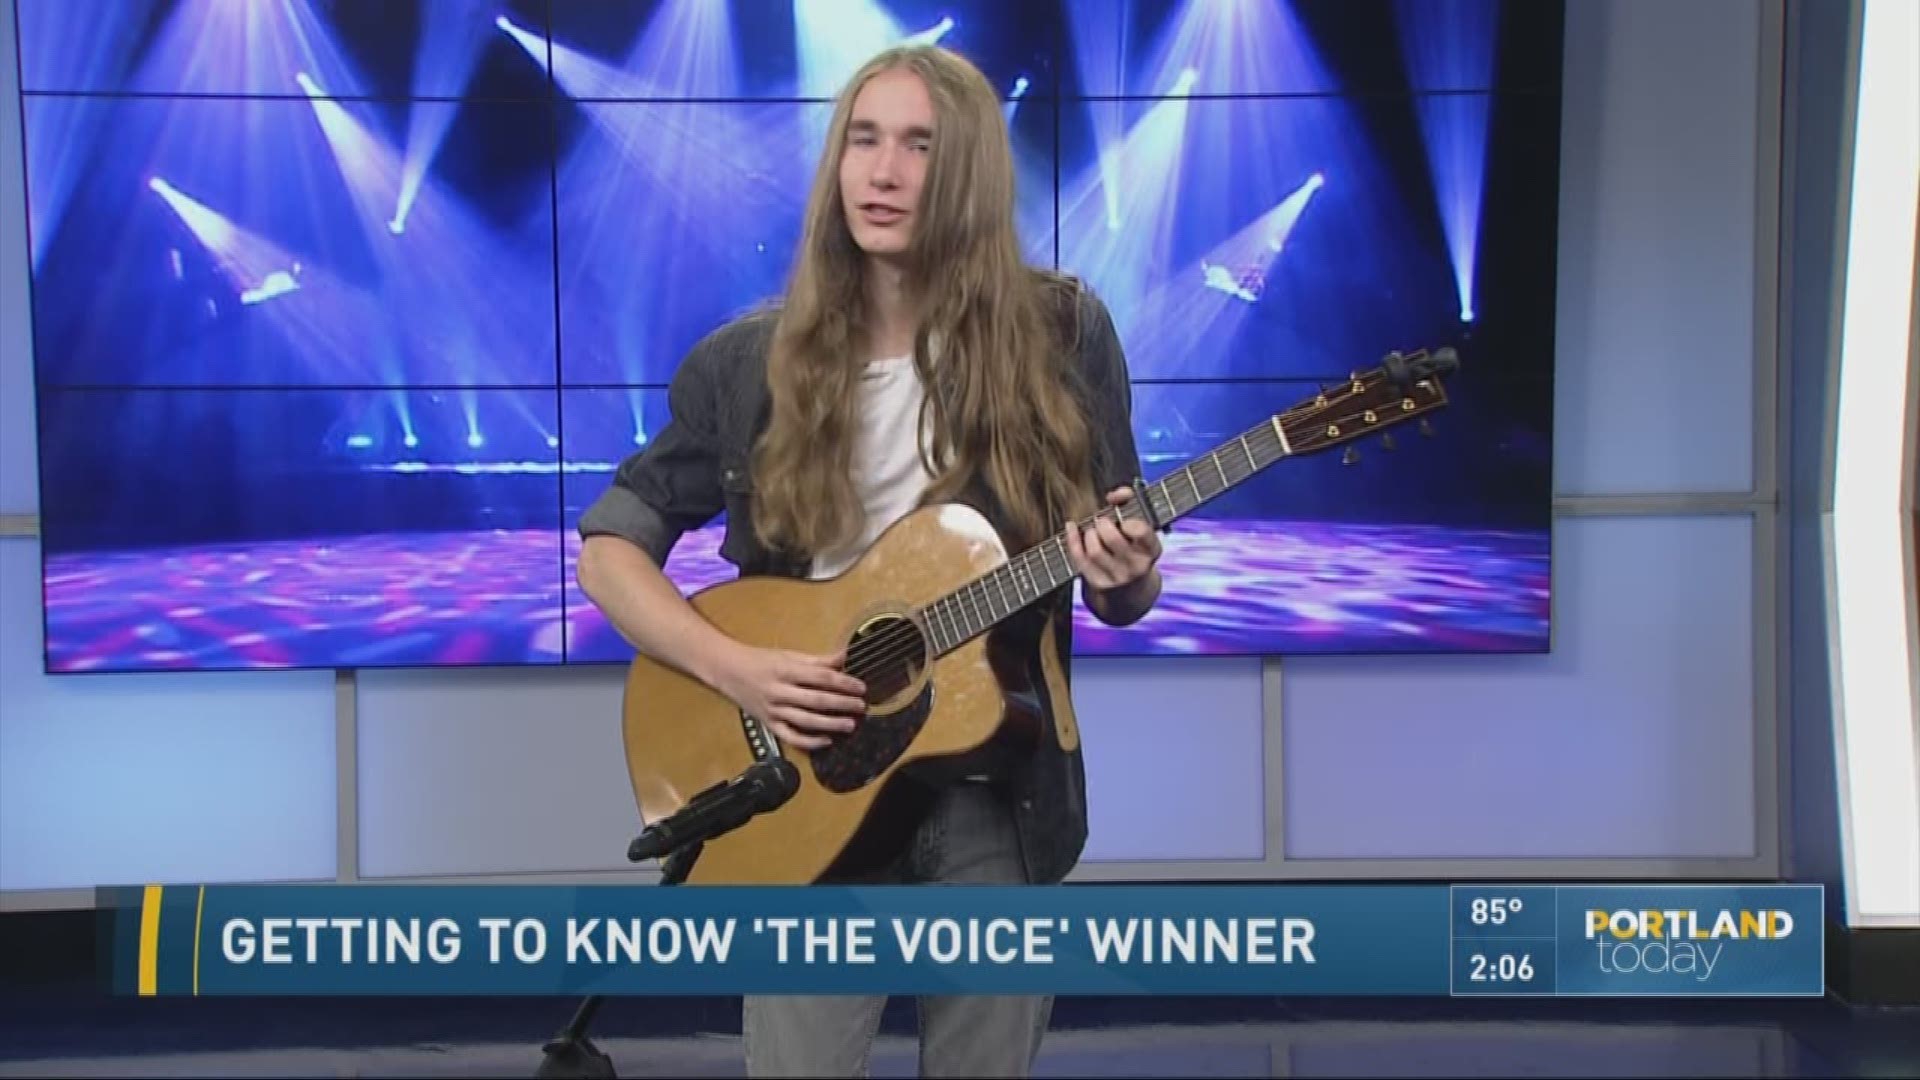 Getting to know "The Voice" winner